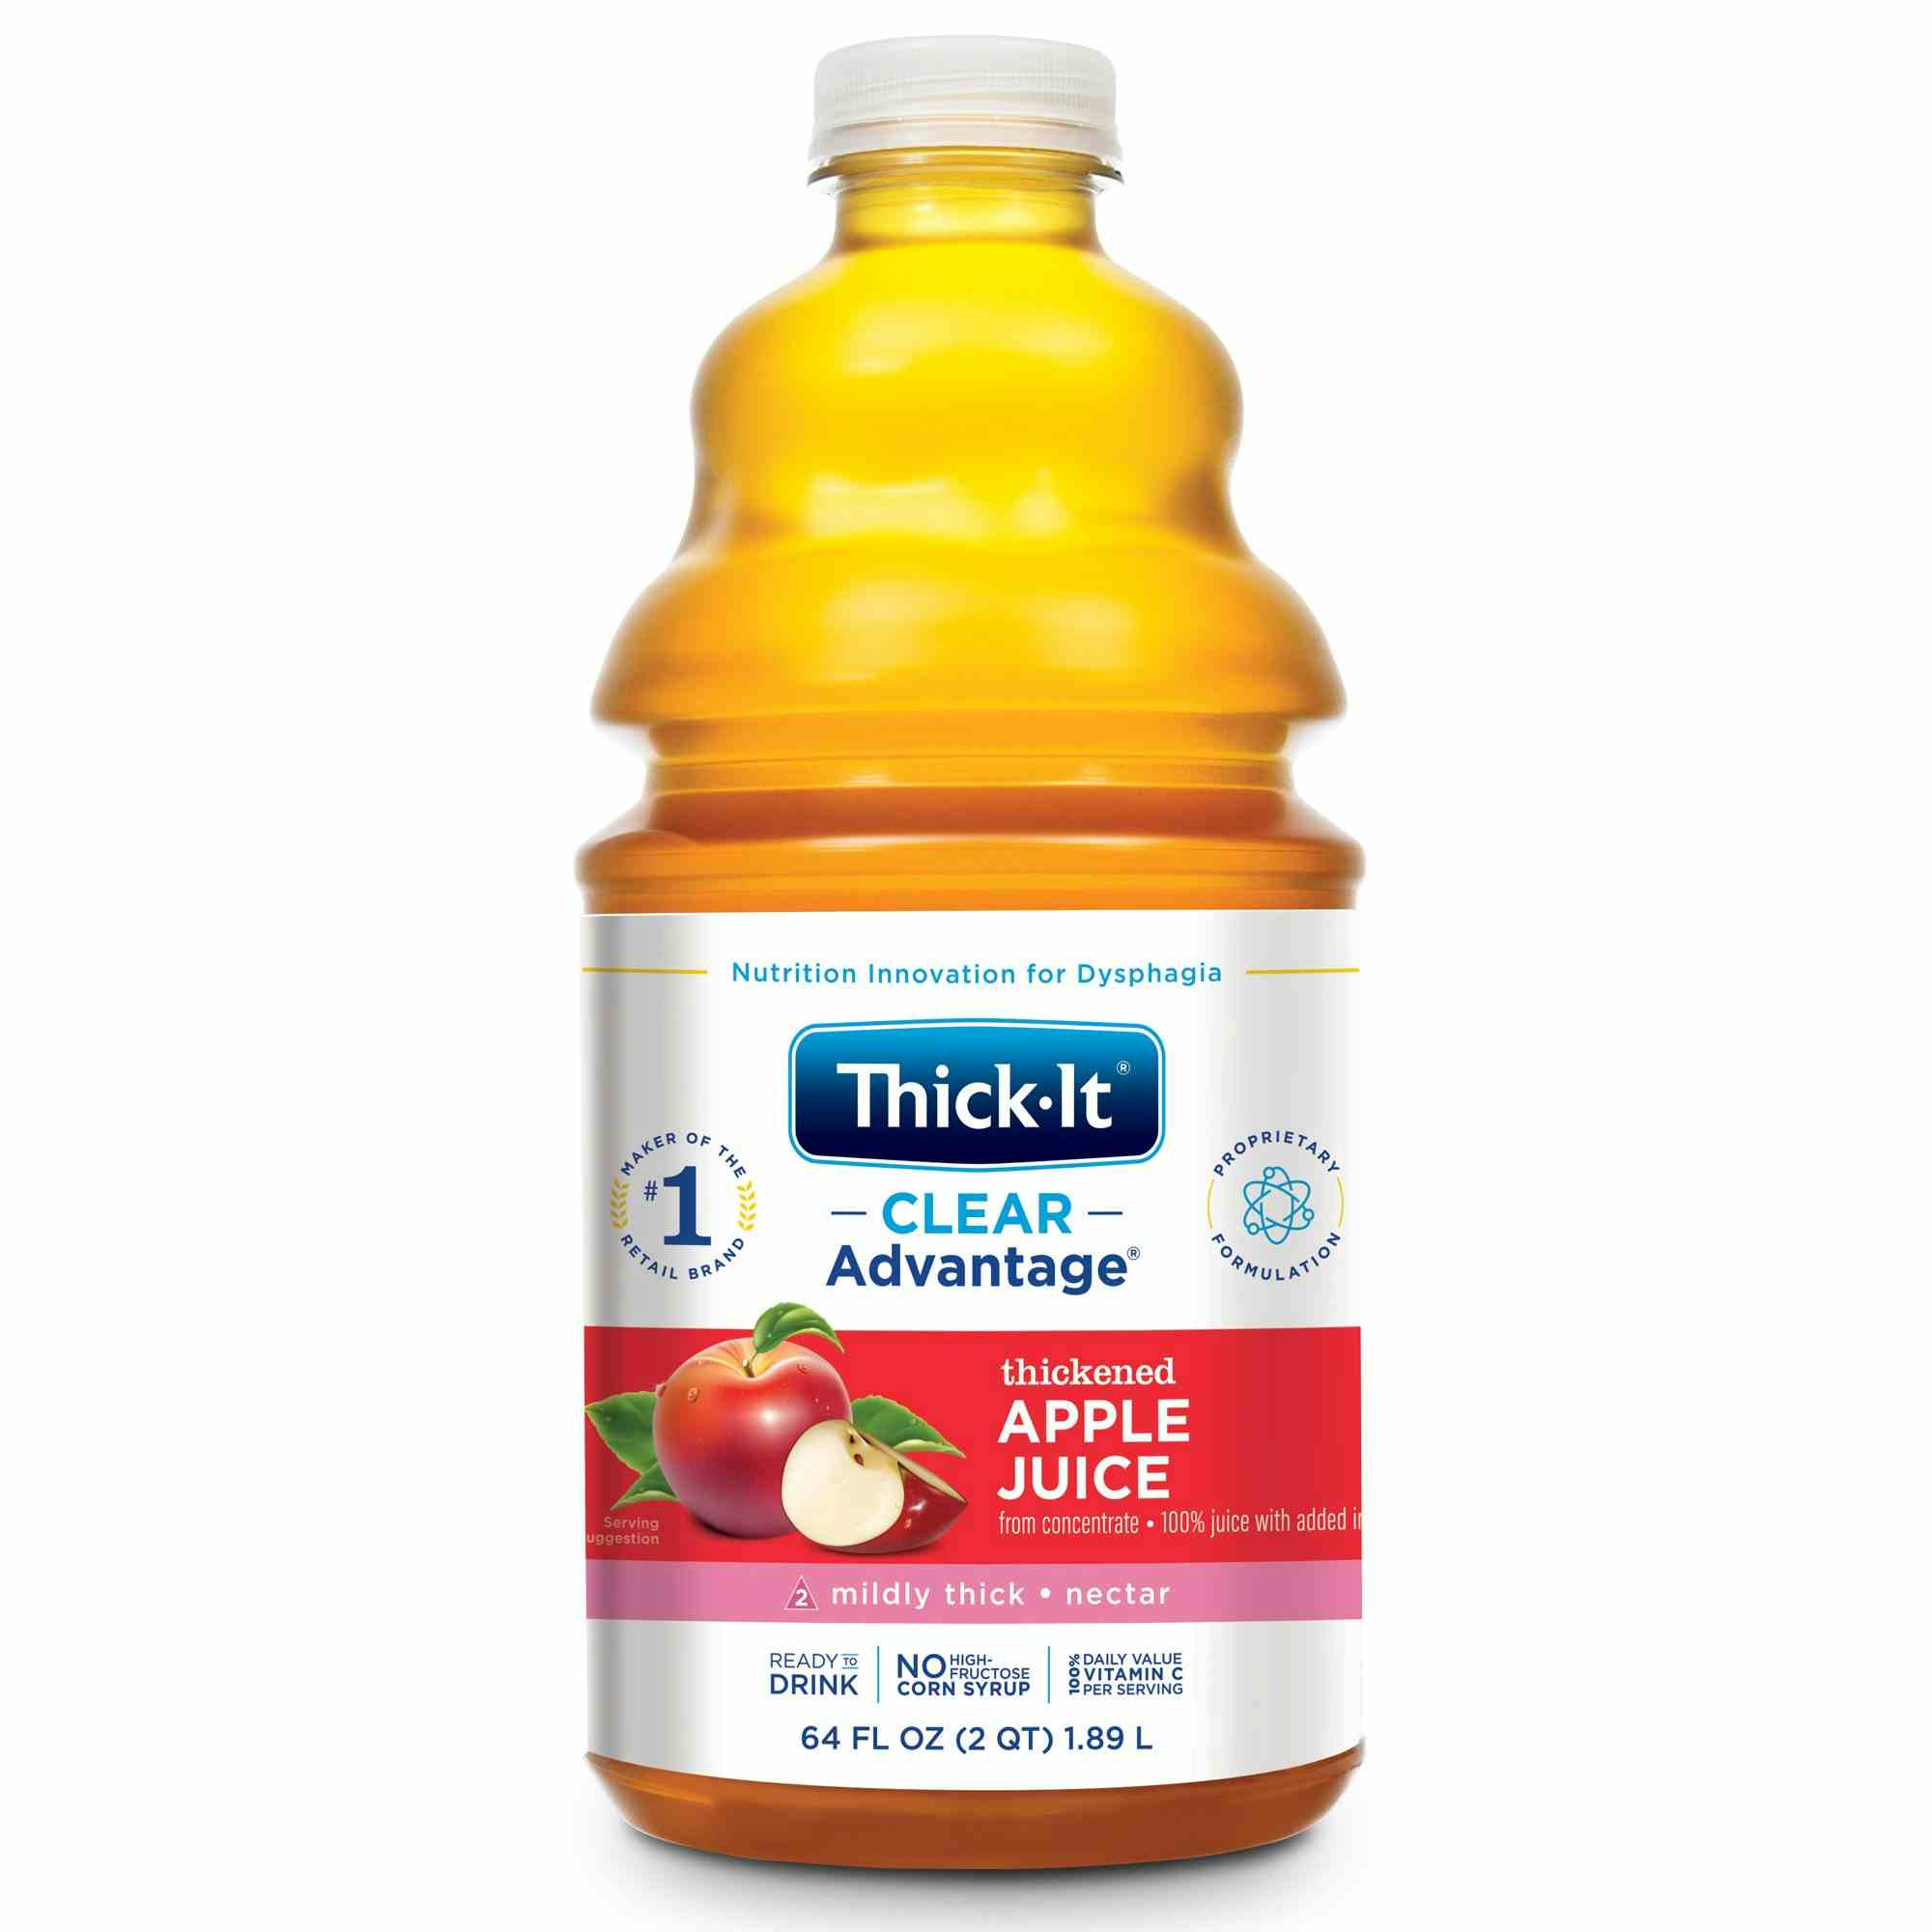 Thick-It Clear Advantage Thickened Apple Juice, Nectar Consistency, 64 oz., B454-A5044, Case of 4